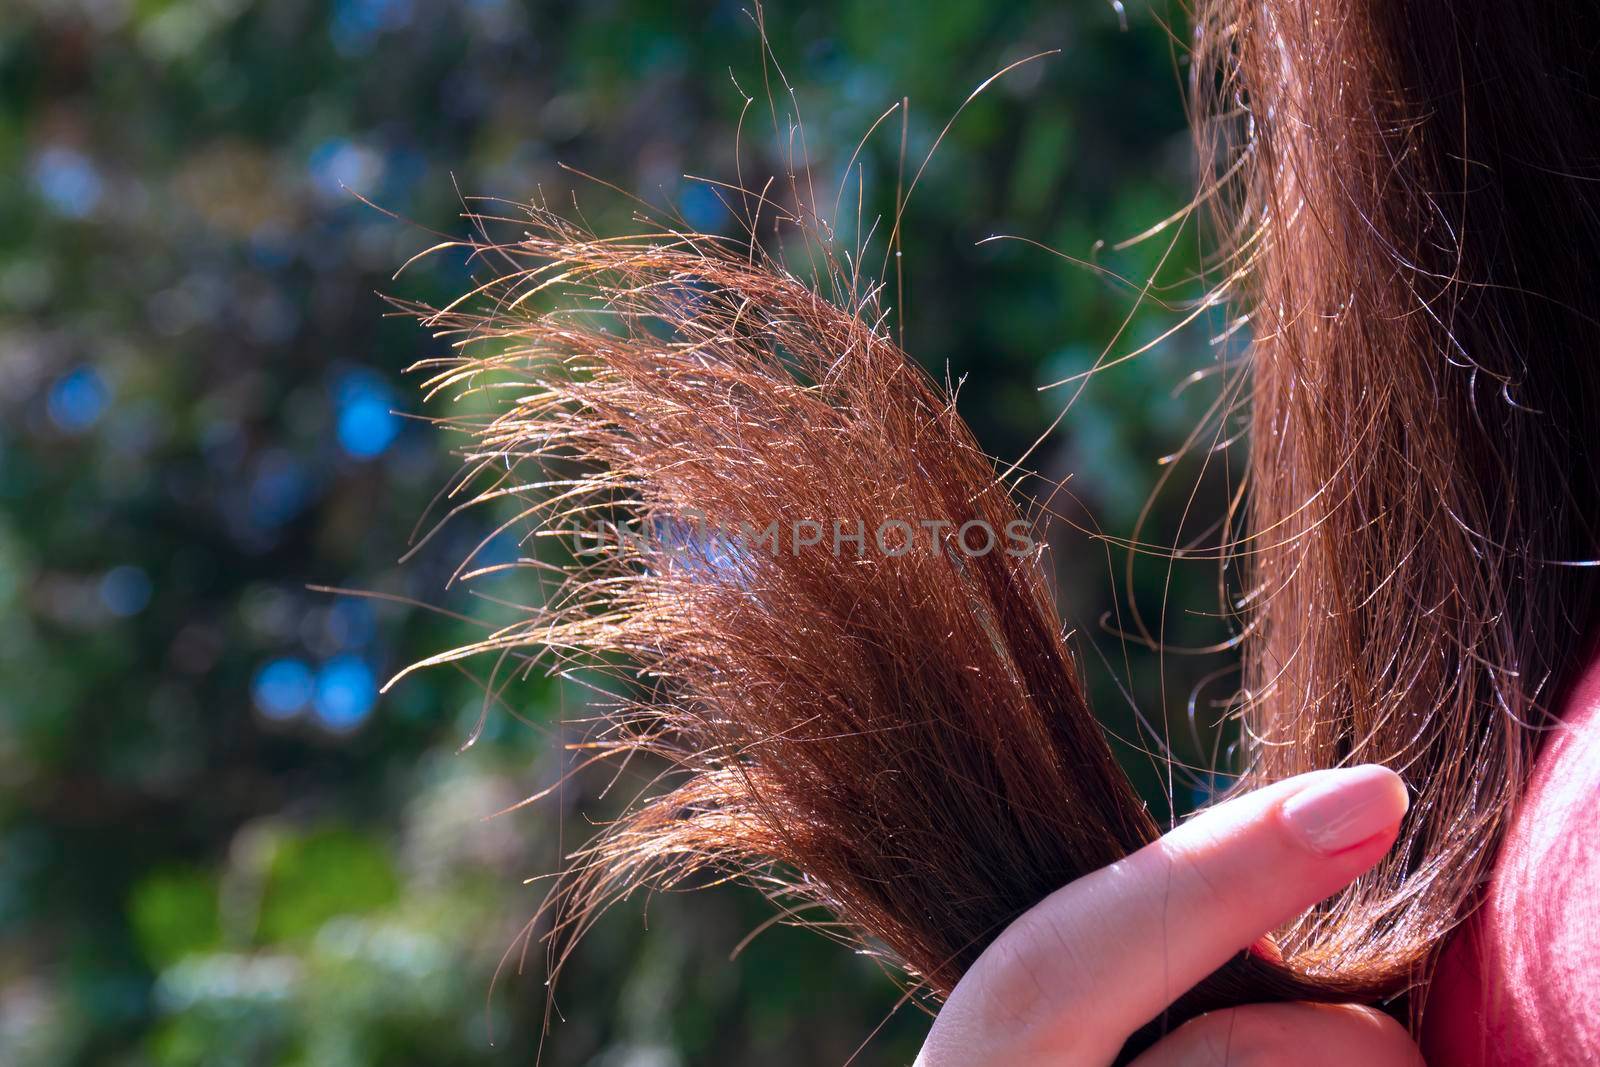 Broken hair in a natural green environment. Young woman holds a lock of hair in her hand.